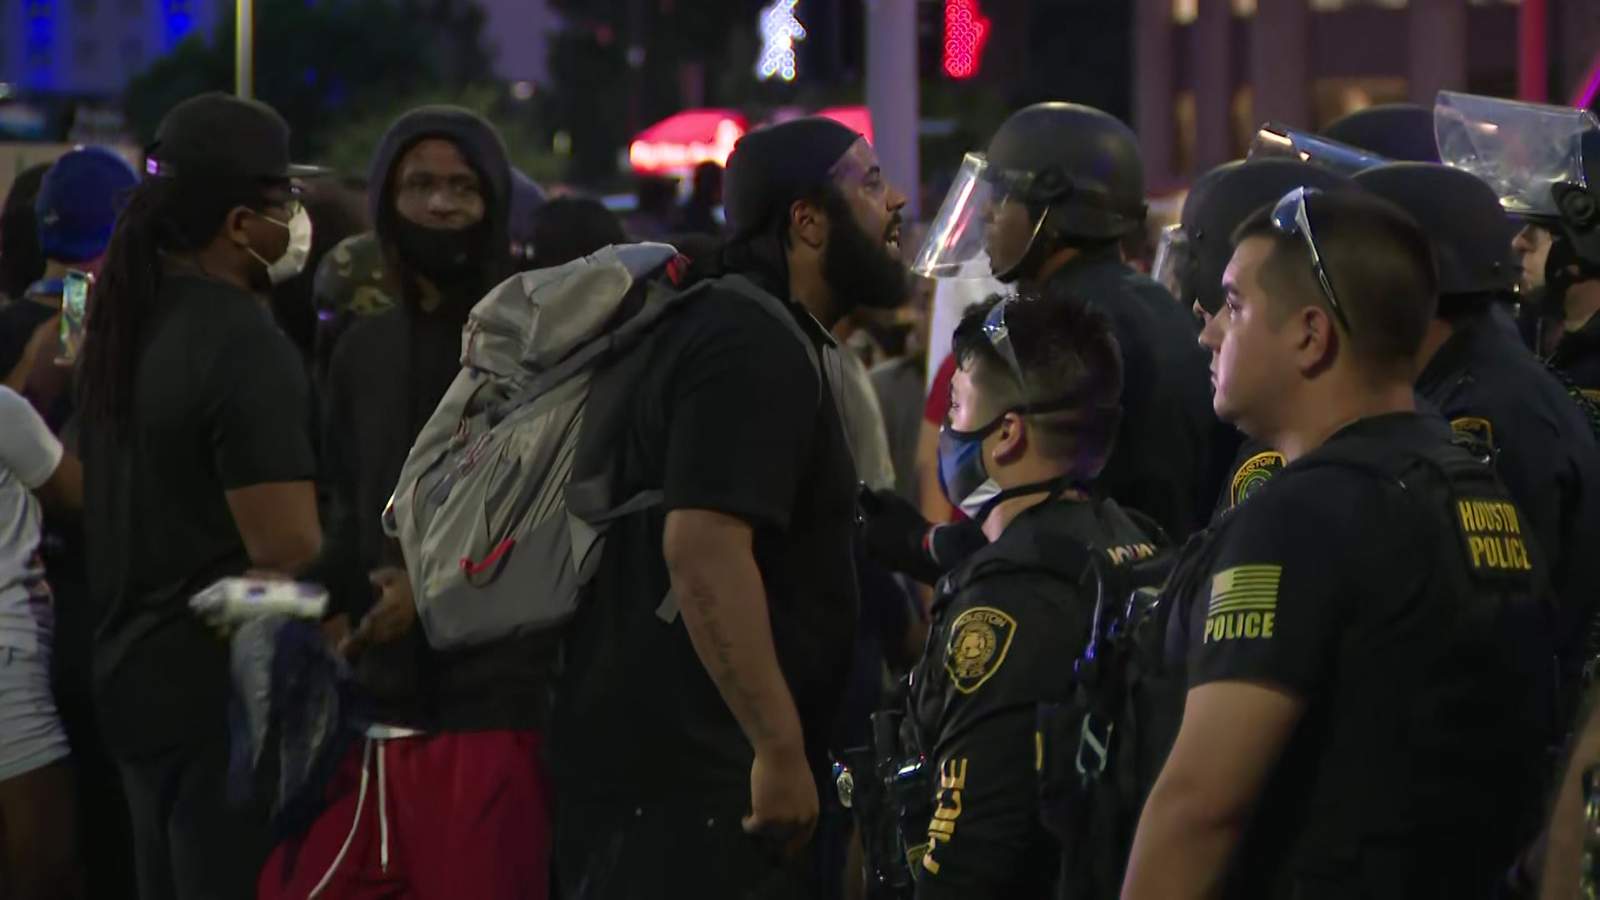 UPDATE: 100 to 150 arrests made in Houston protests, a few officers suffer minor injuries, Acevedo says